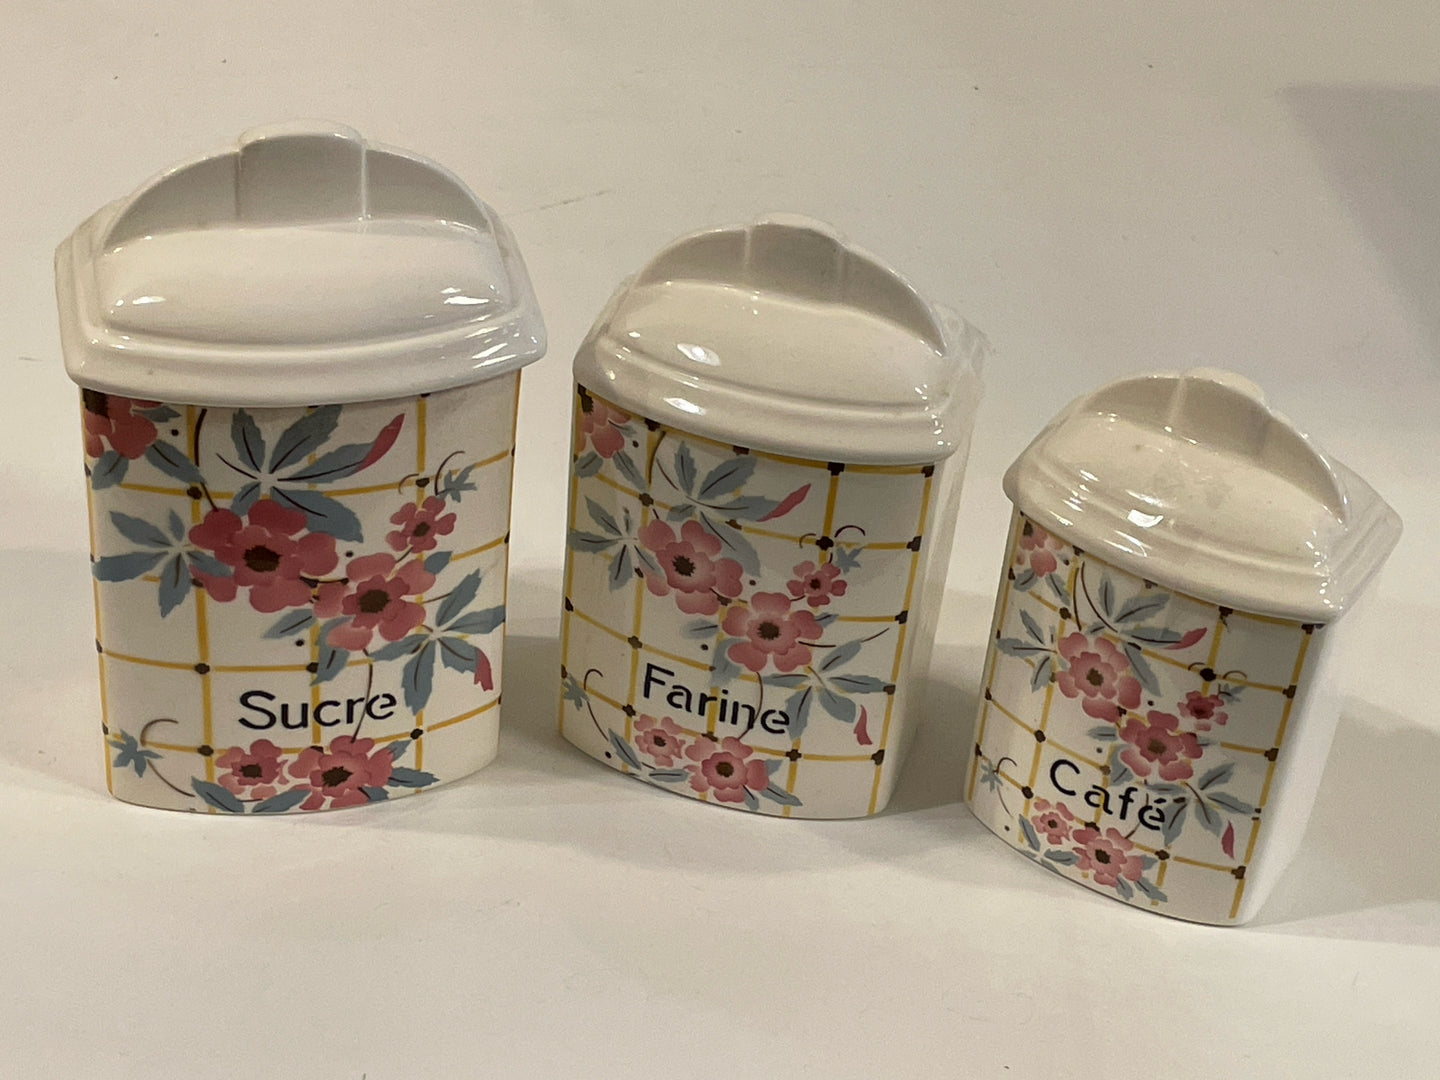 Vintage Canister Set from Ditmar-Urbach